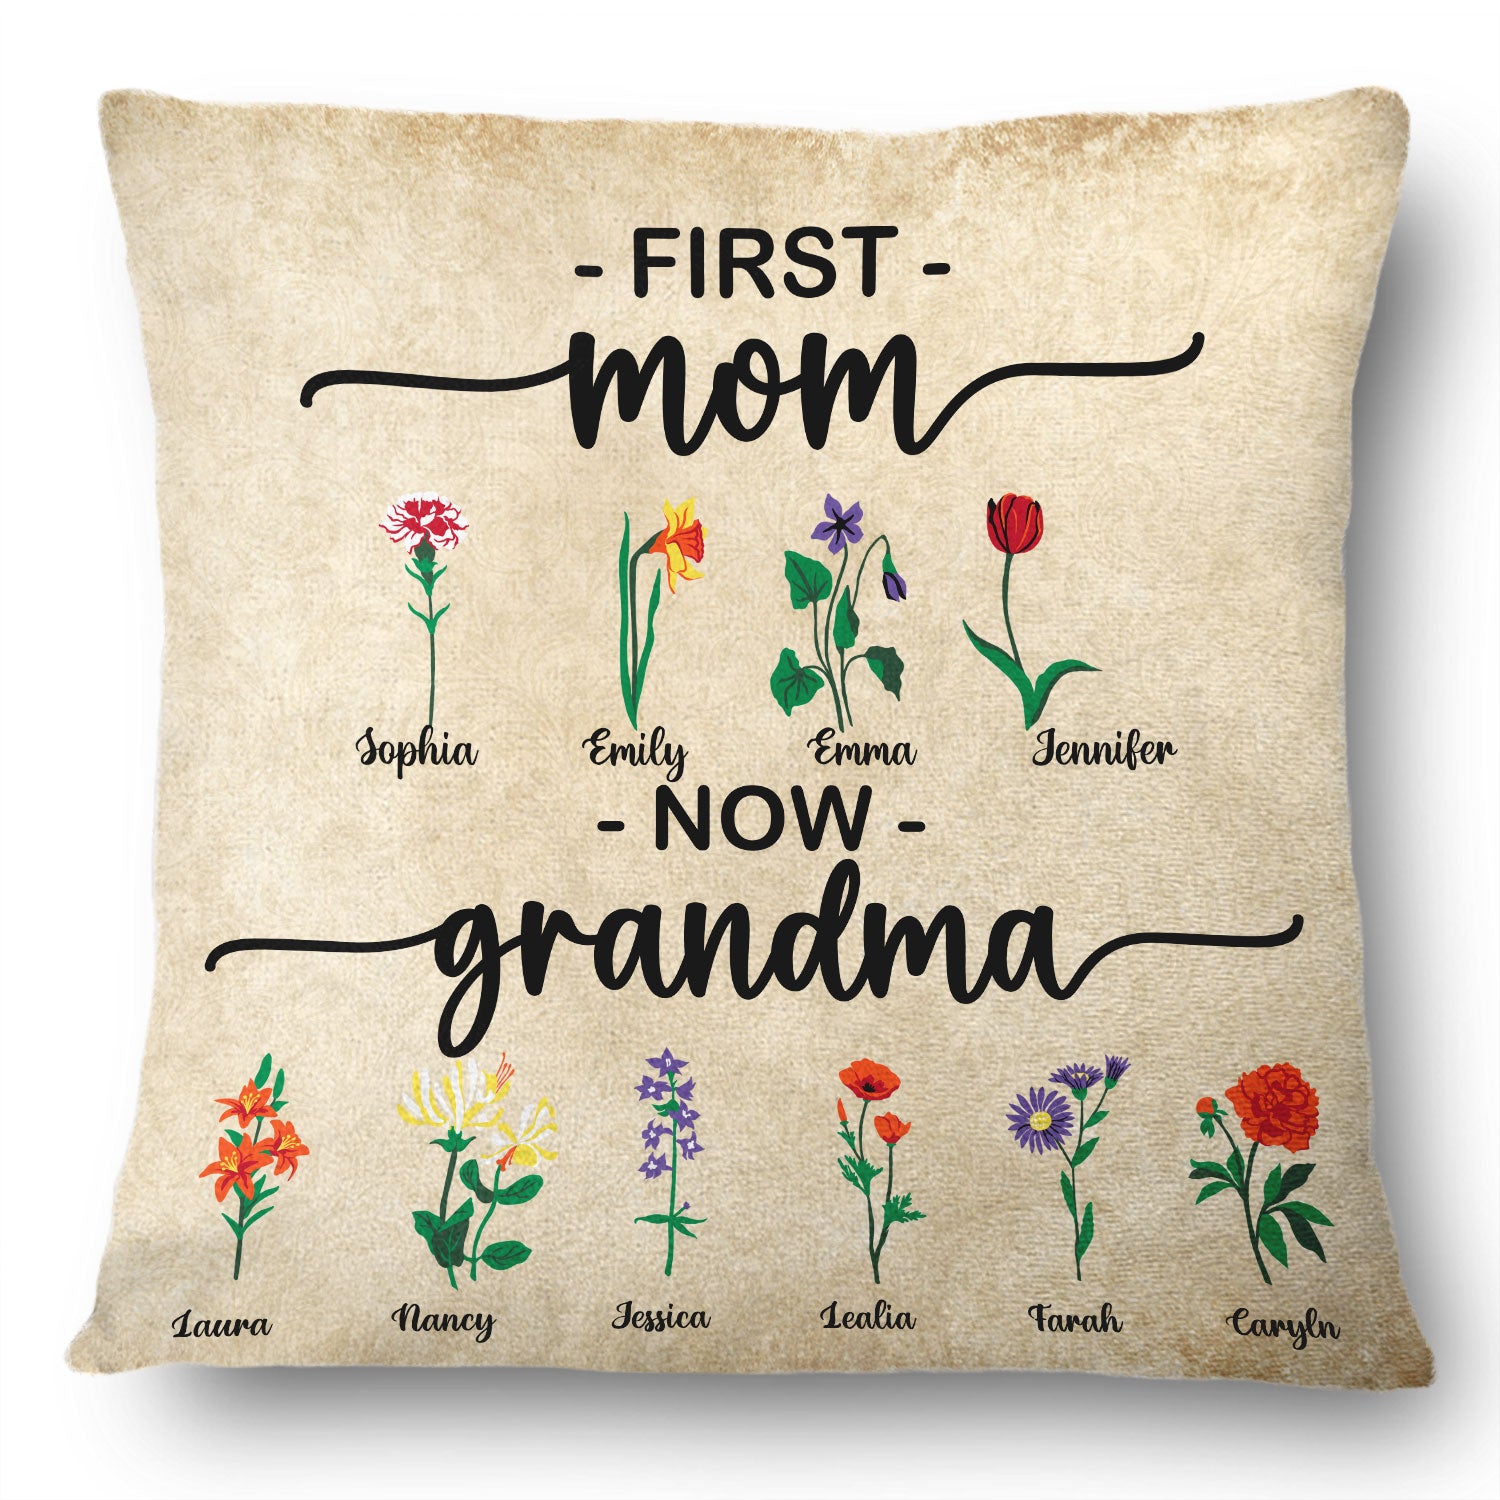 First Mom Now Grandma Aesthetic Floral Style - Birthday, Loving Gift For Mother, Grandmother - Personalized Pillow